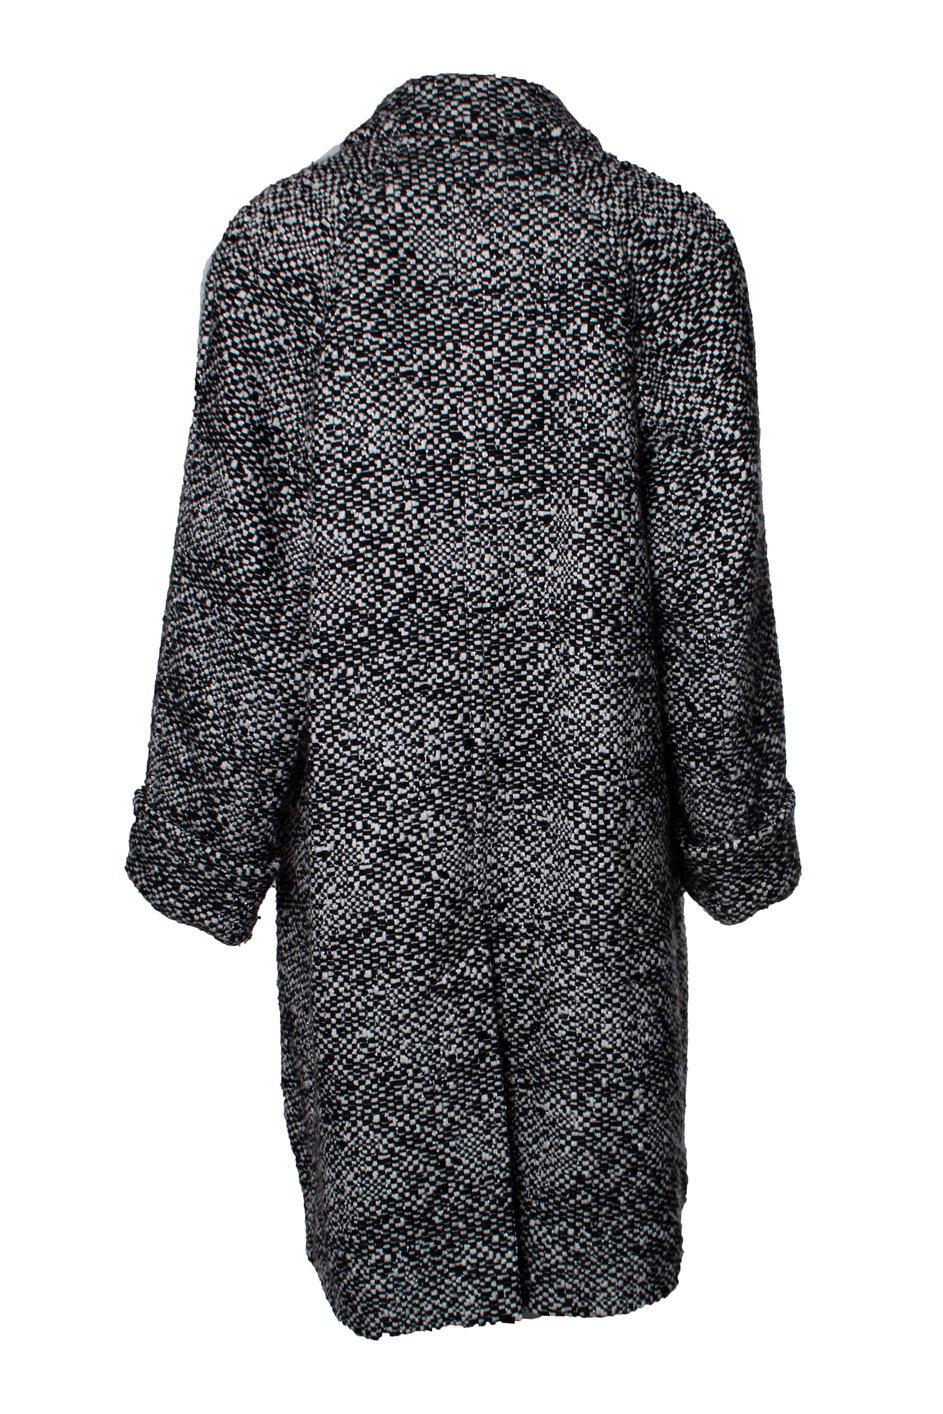 Chanel New Lesage Tweed Coat For Sale 2